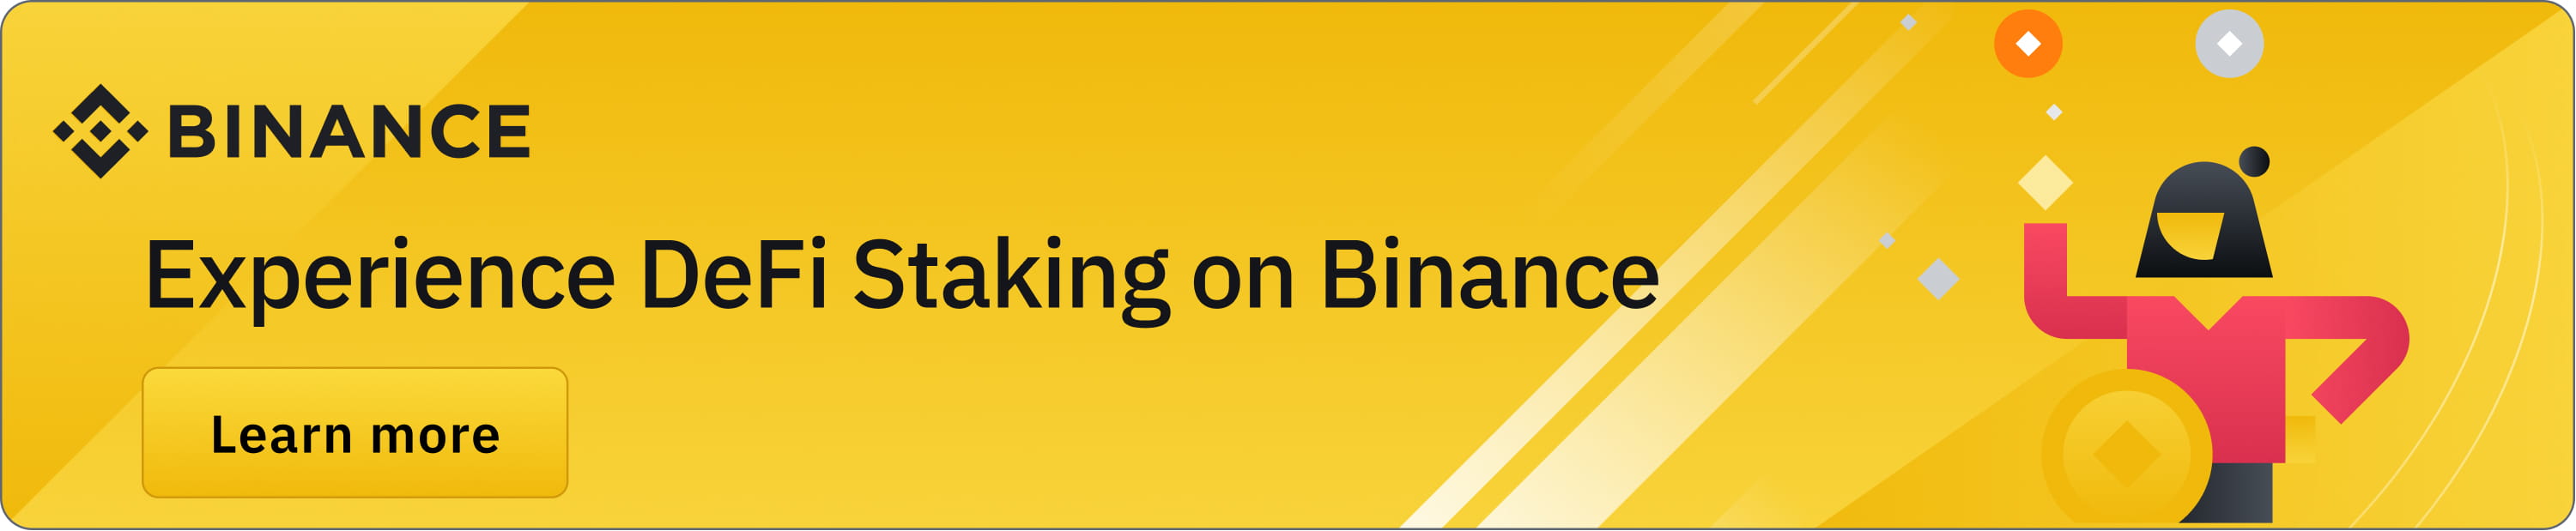 Binance Staking: Features, Benefits, and How to Stake BNB